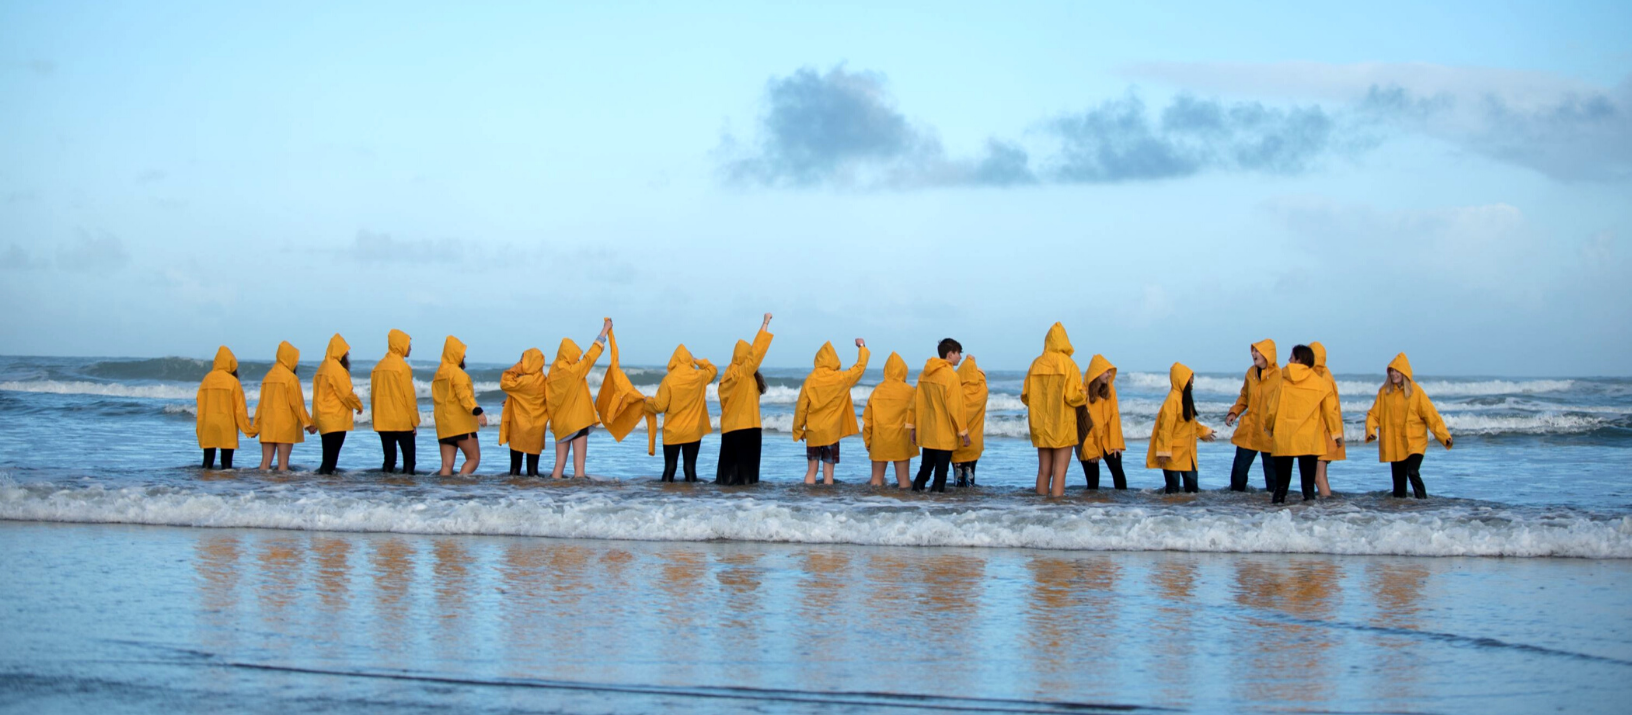 High Tide Don't Hide students standing in a line in yellow rain jackets holding hands in the air. All standing in the tide facing out to sea.